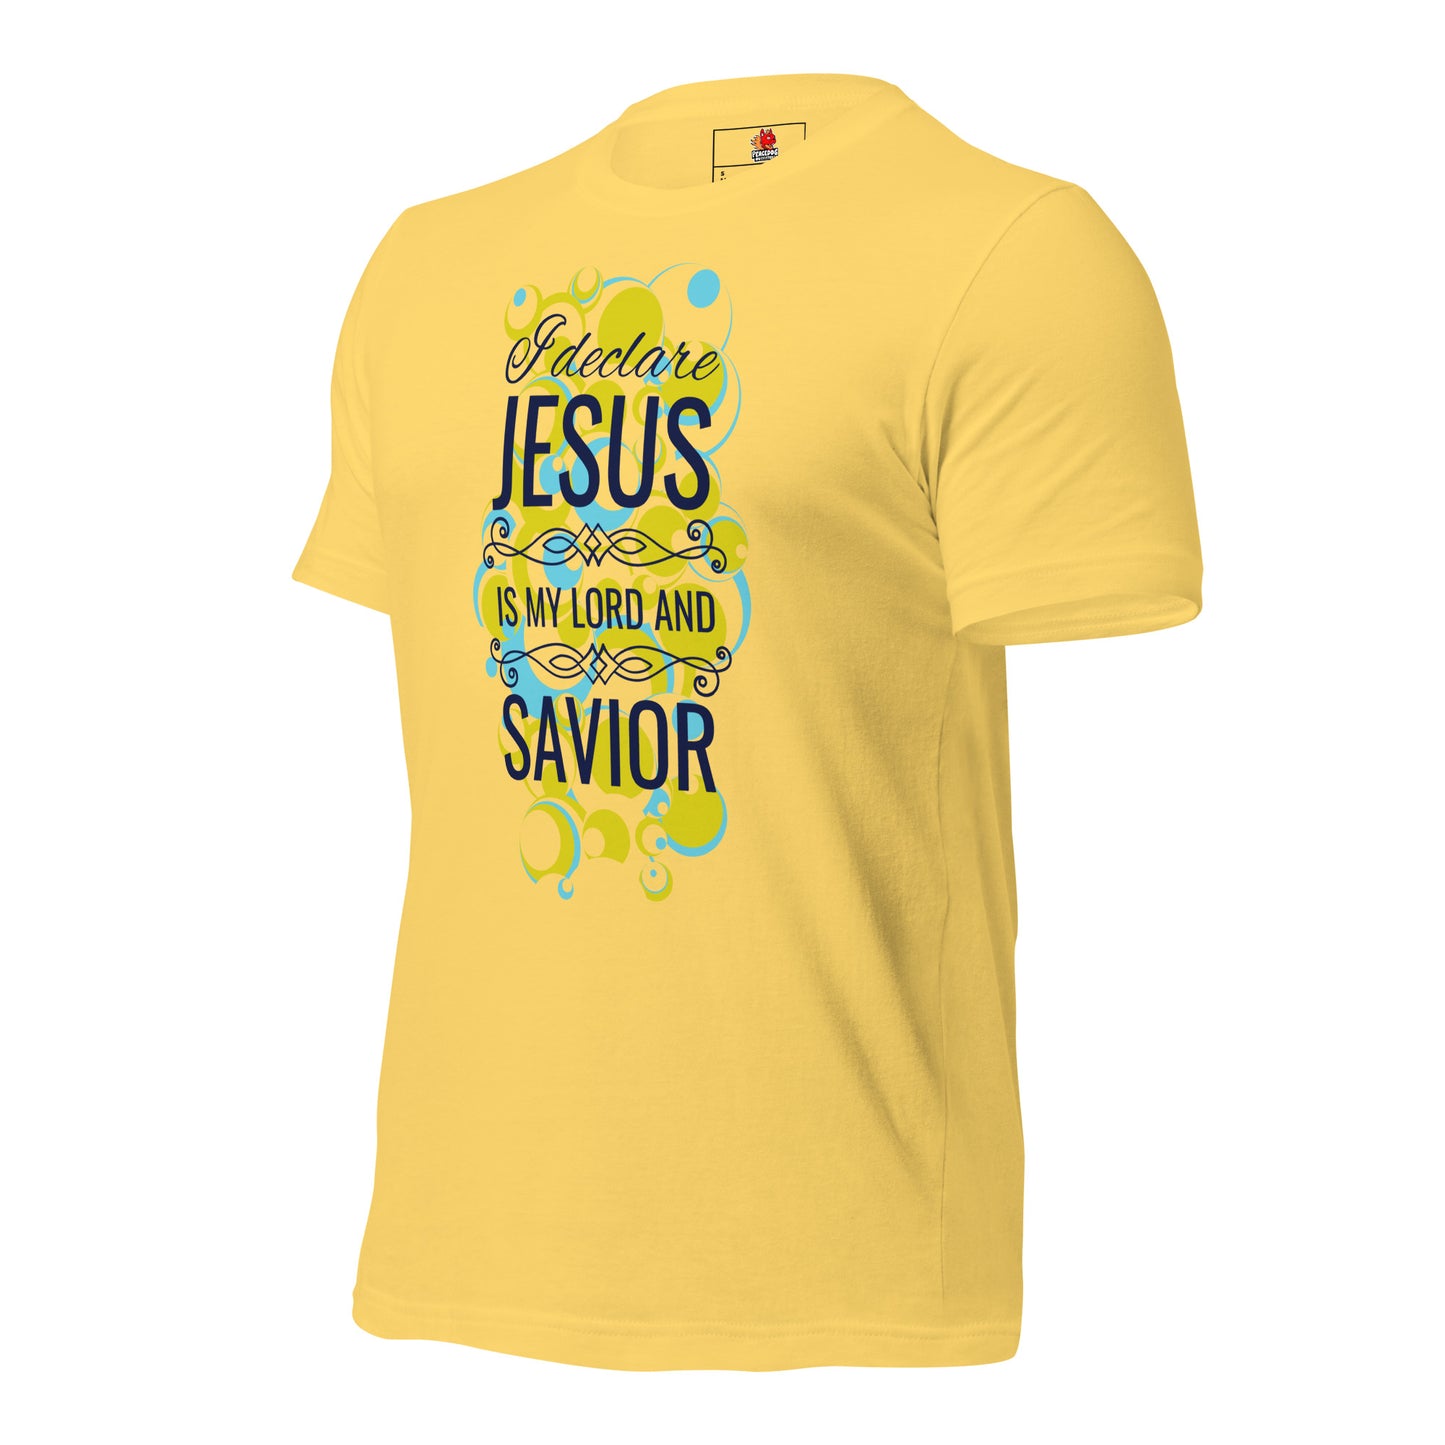 I declare Jesus is my Lord and Savior... T-Shirt